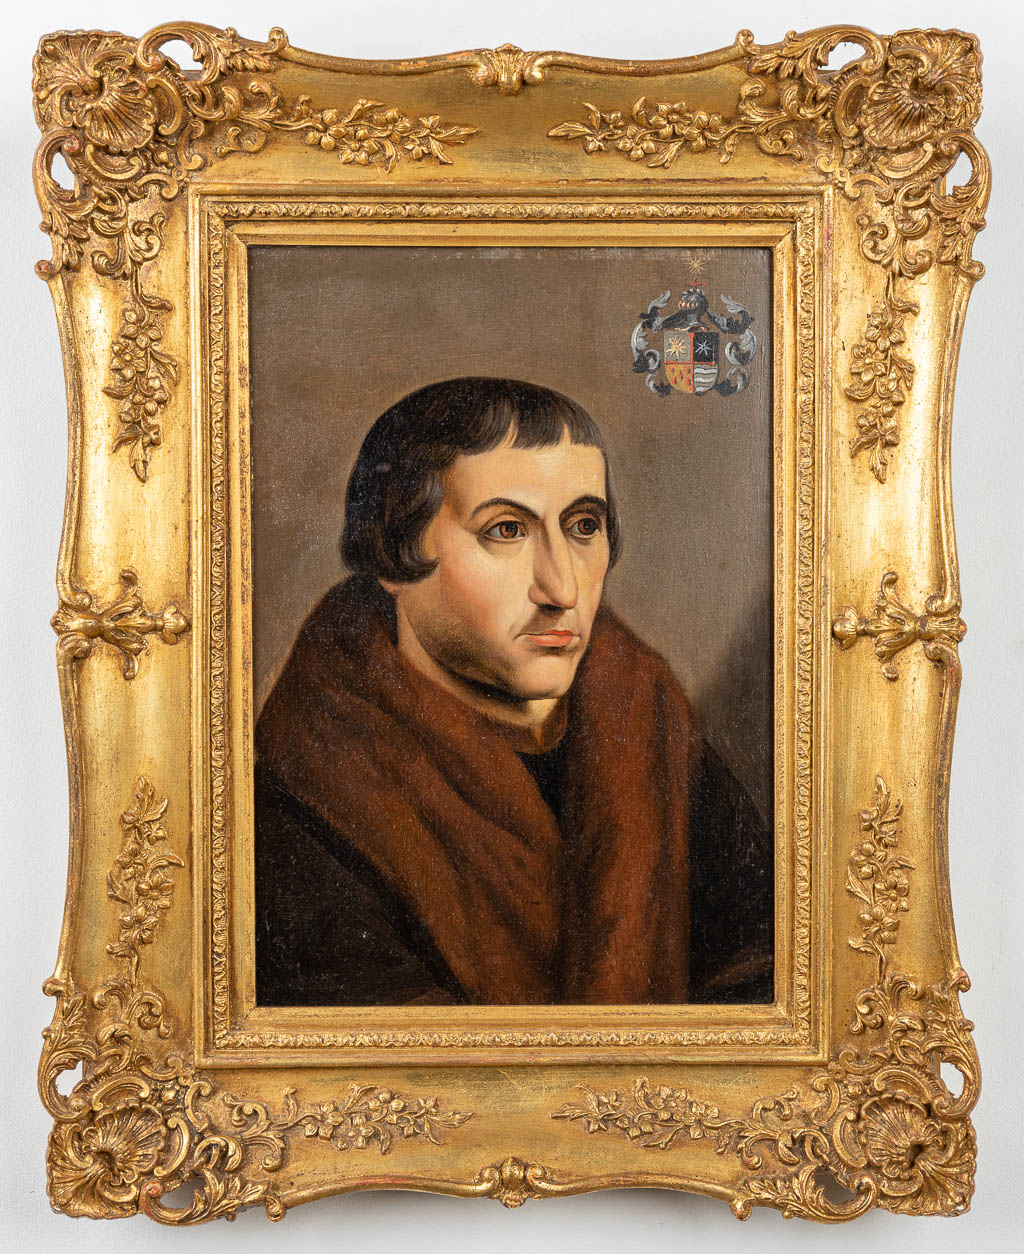 An antique portrait of Juan Luis Vives, oil on panel. The panel was made during the 17th century. (31 x 44 cm)